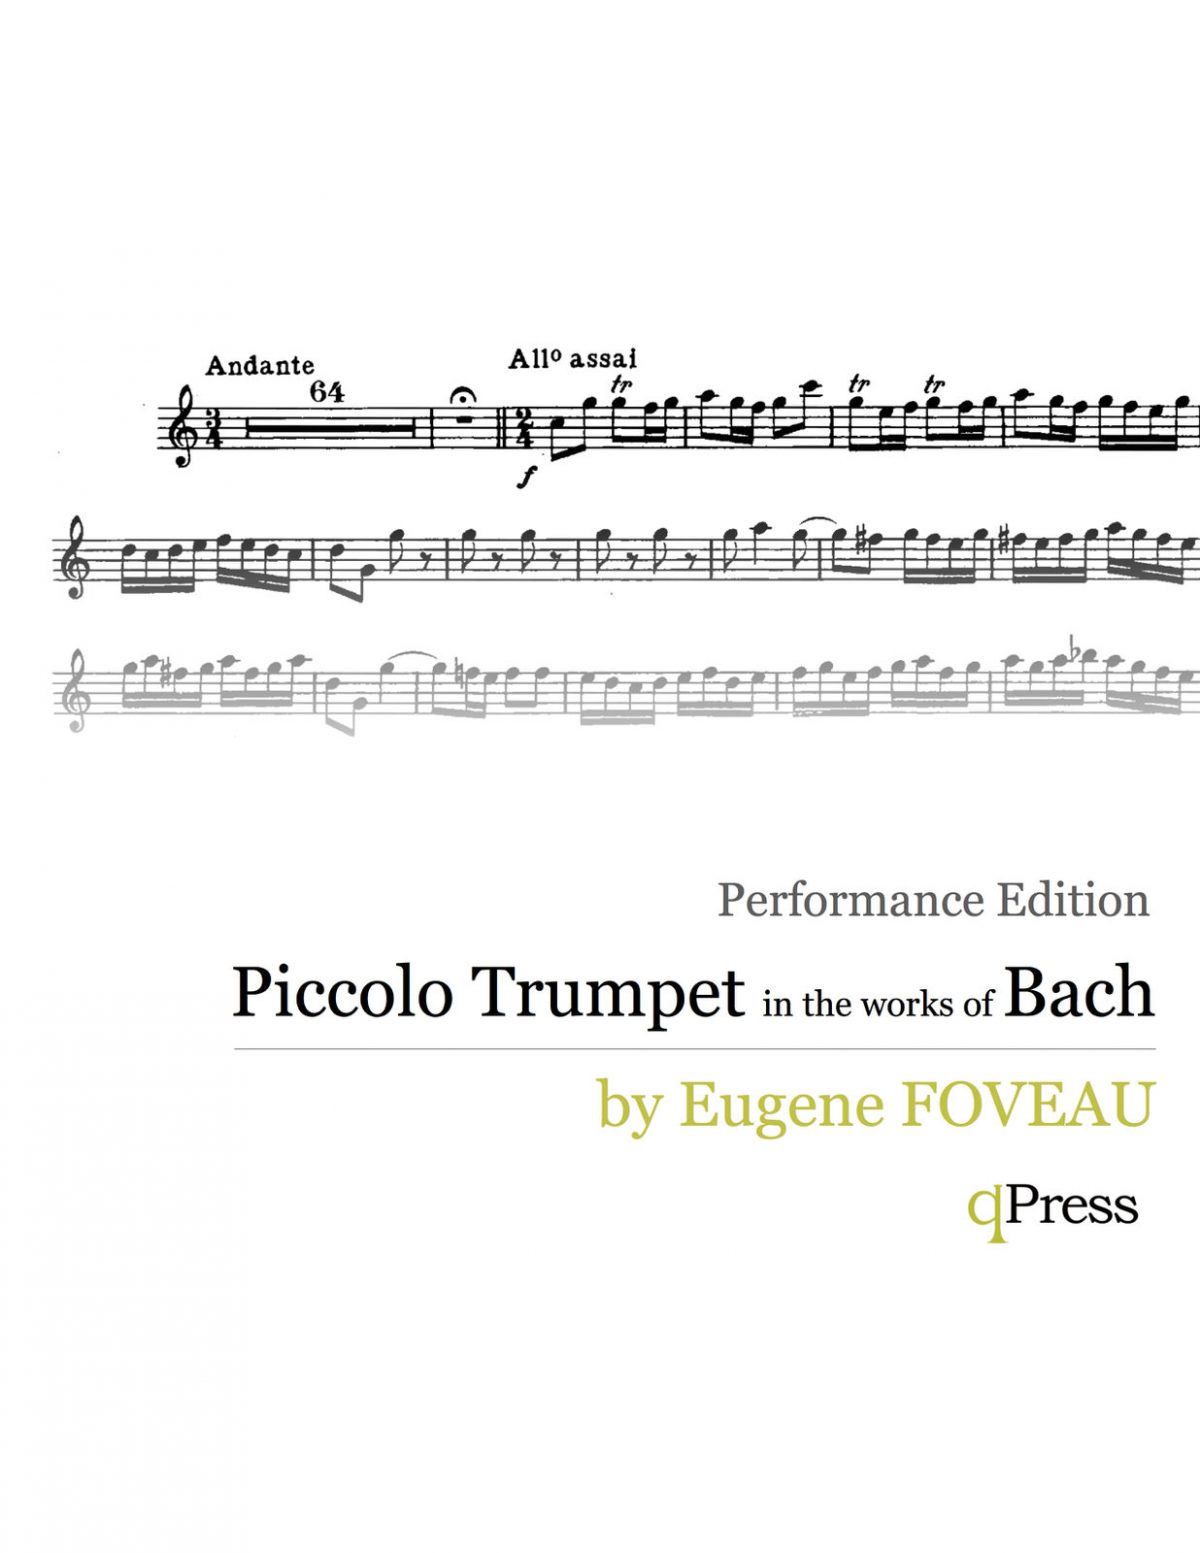 Piccolo Trumpet in the works of Bach